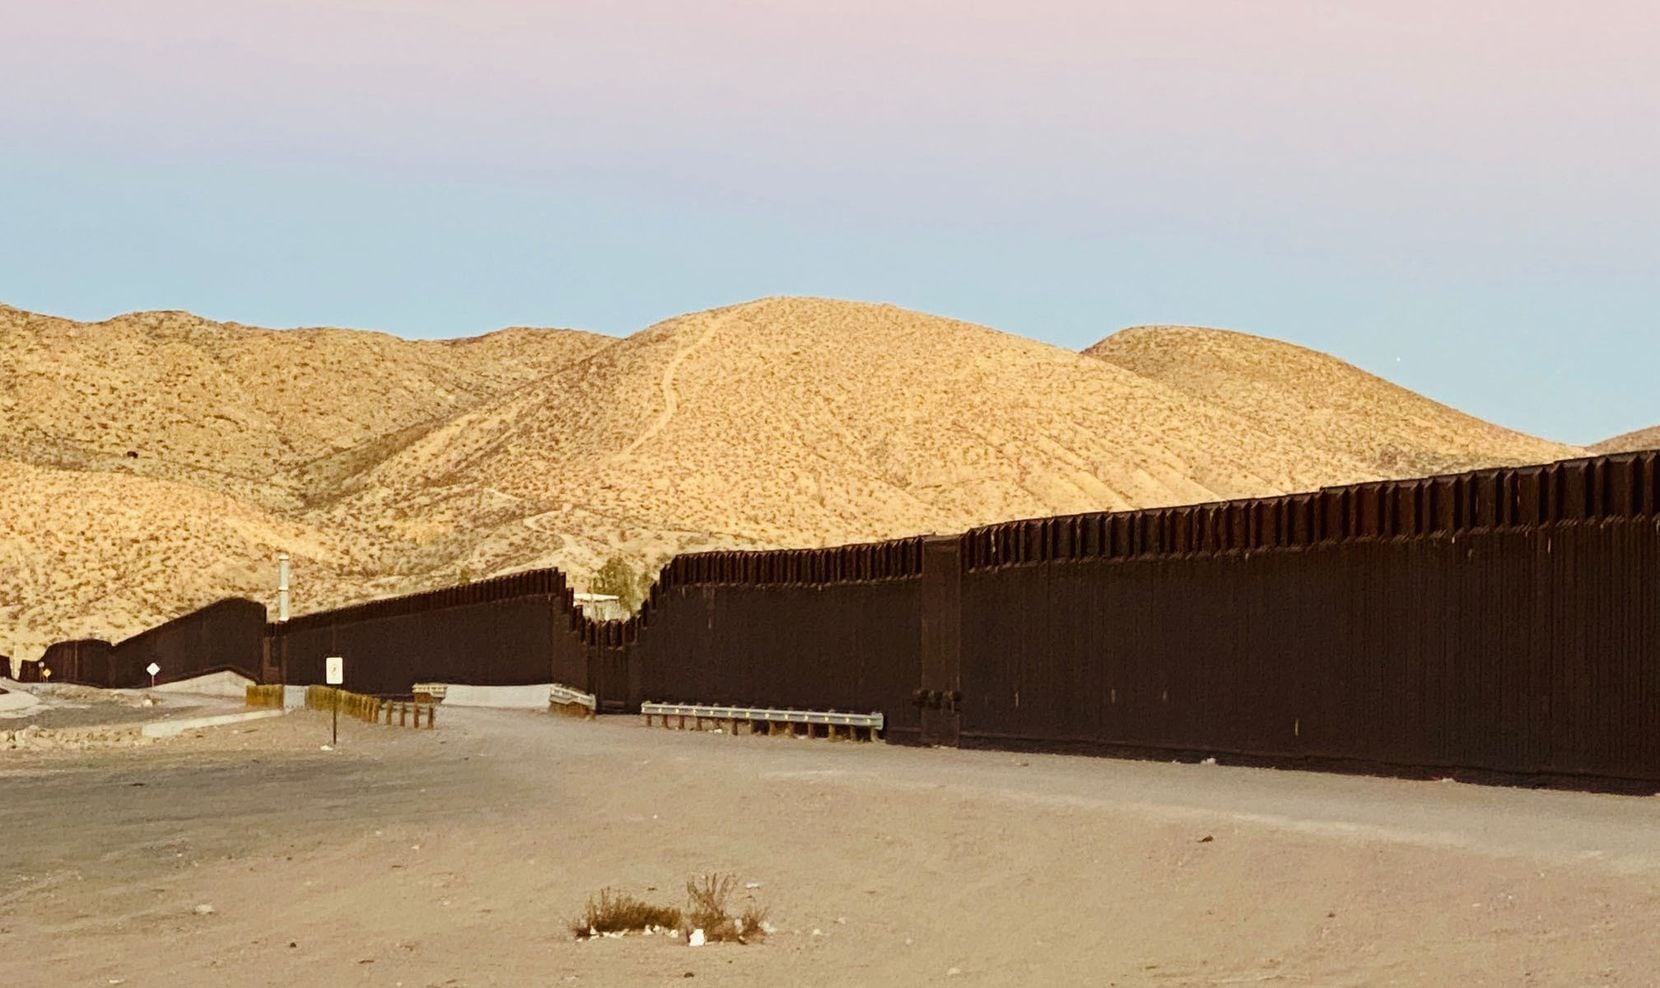 This corner of New Mexico, Chihuahua and Texas is known by some migrants as the "Devil's Triangle" because of the injuries and deaths suffered when people try to cross the 30-foot bollard wall.